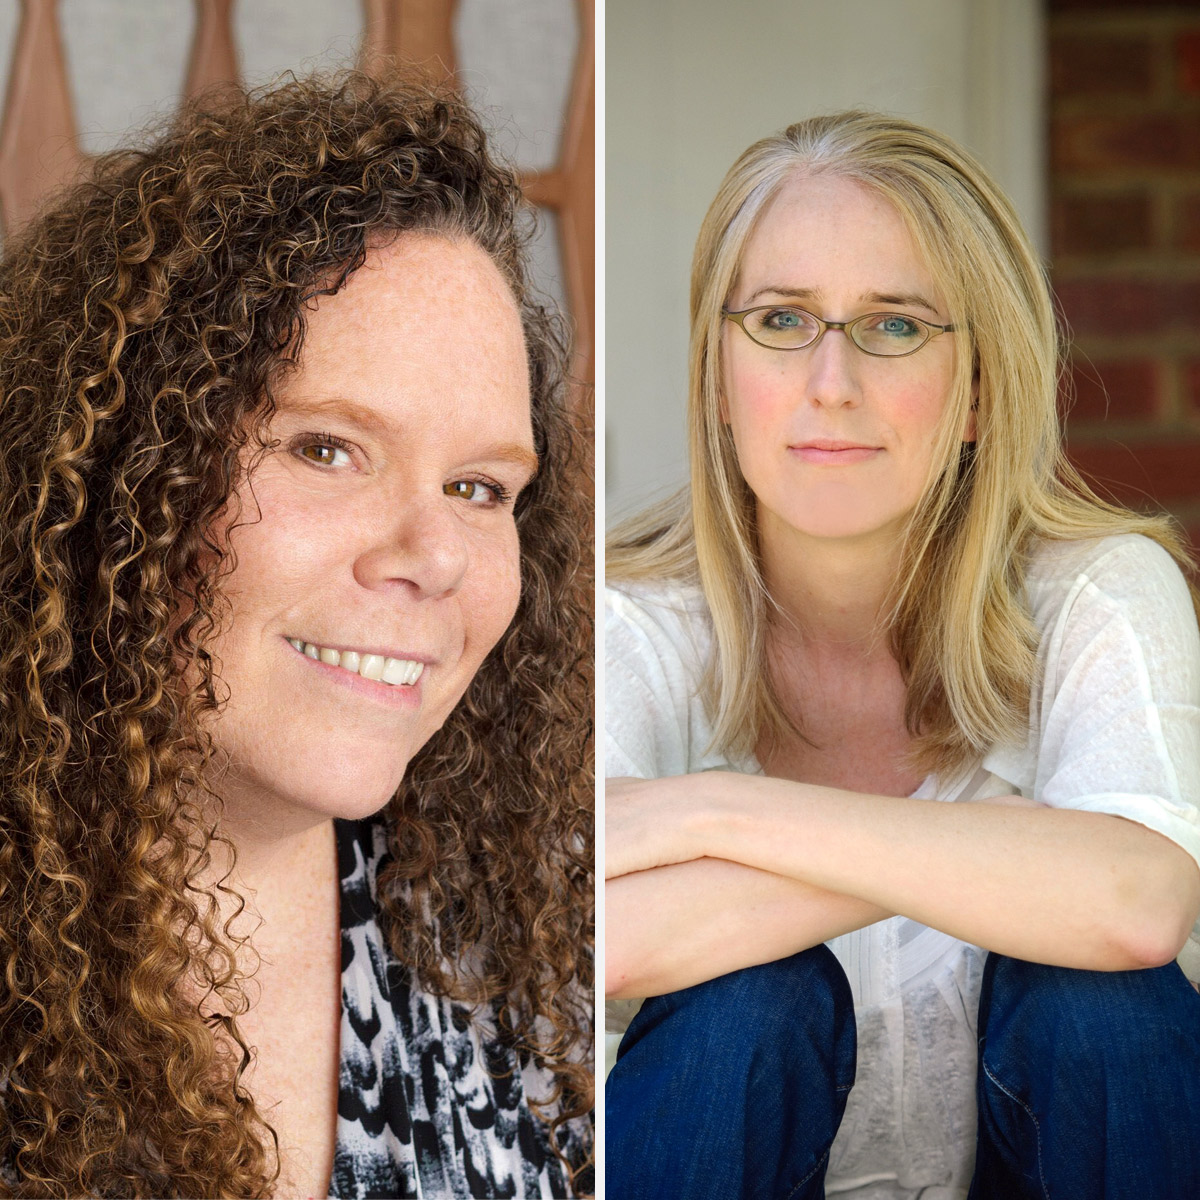 Beth Jackson Klosterboer and Meaghan Mountford, authors at How To Make Cereal Treats